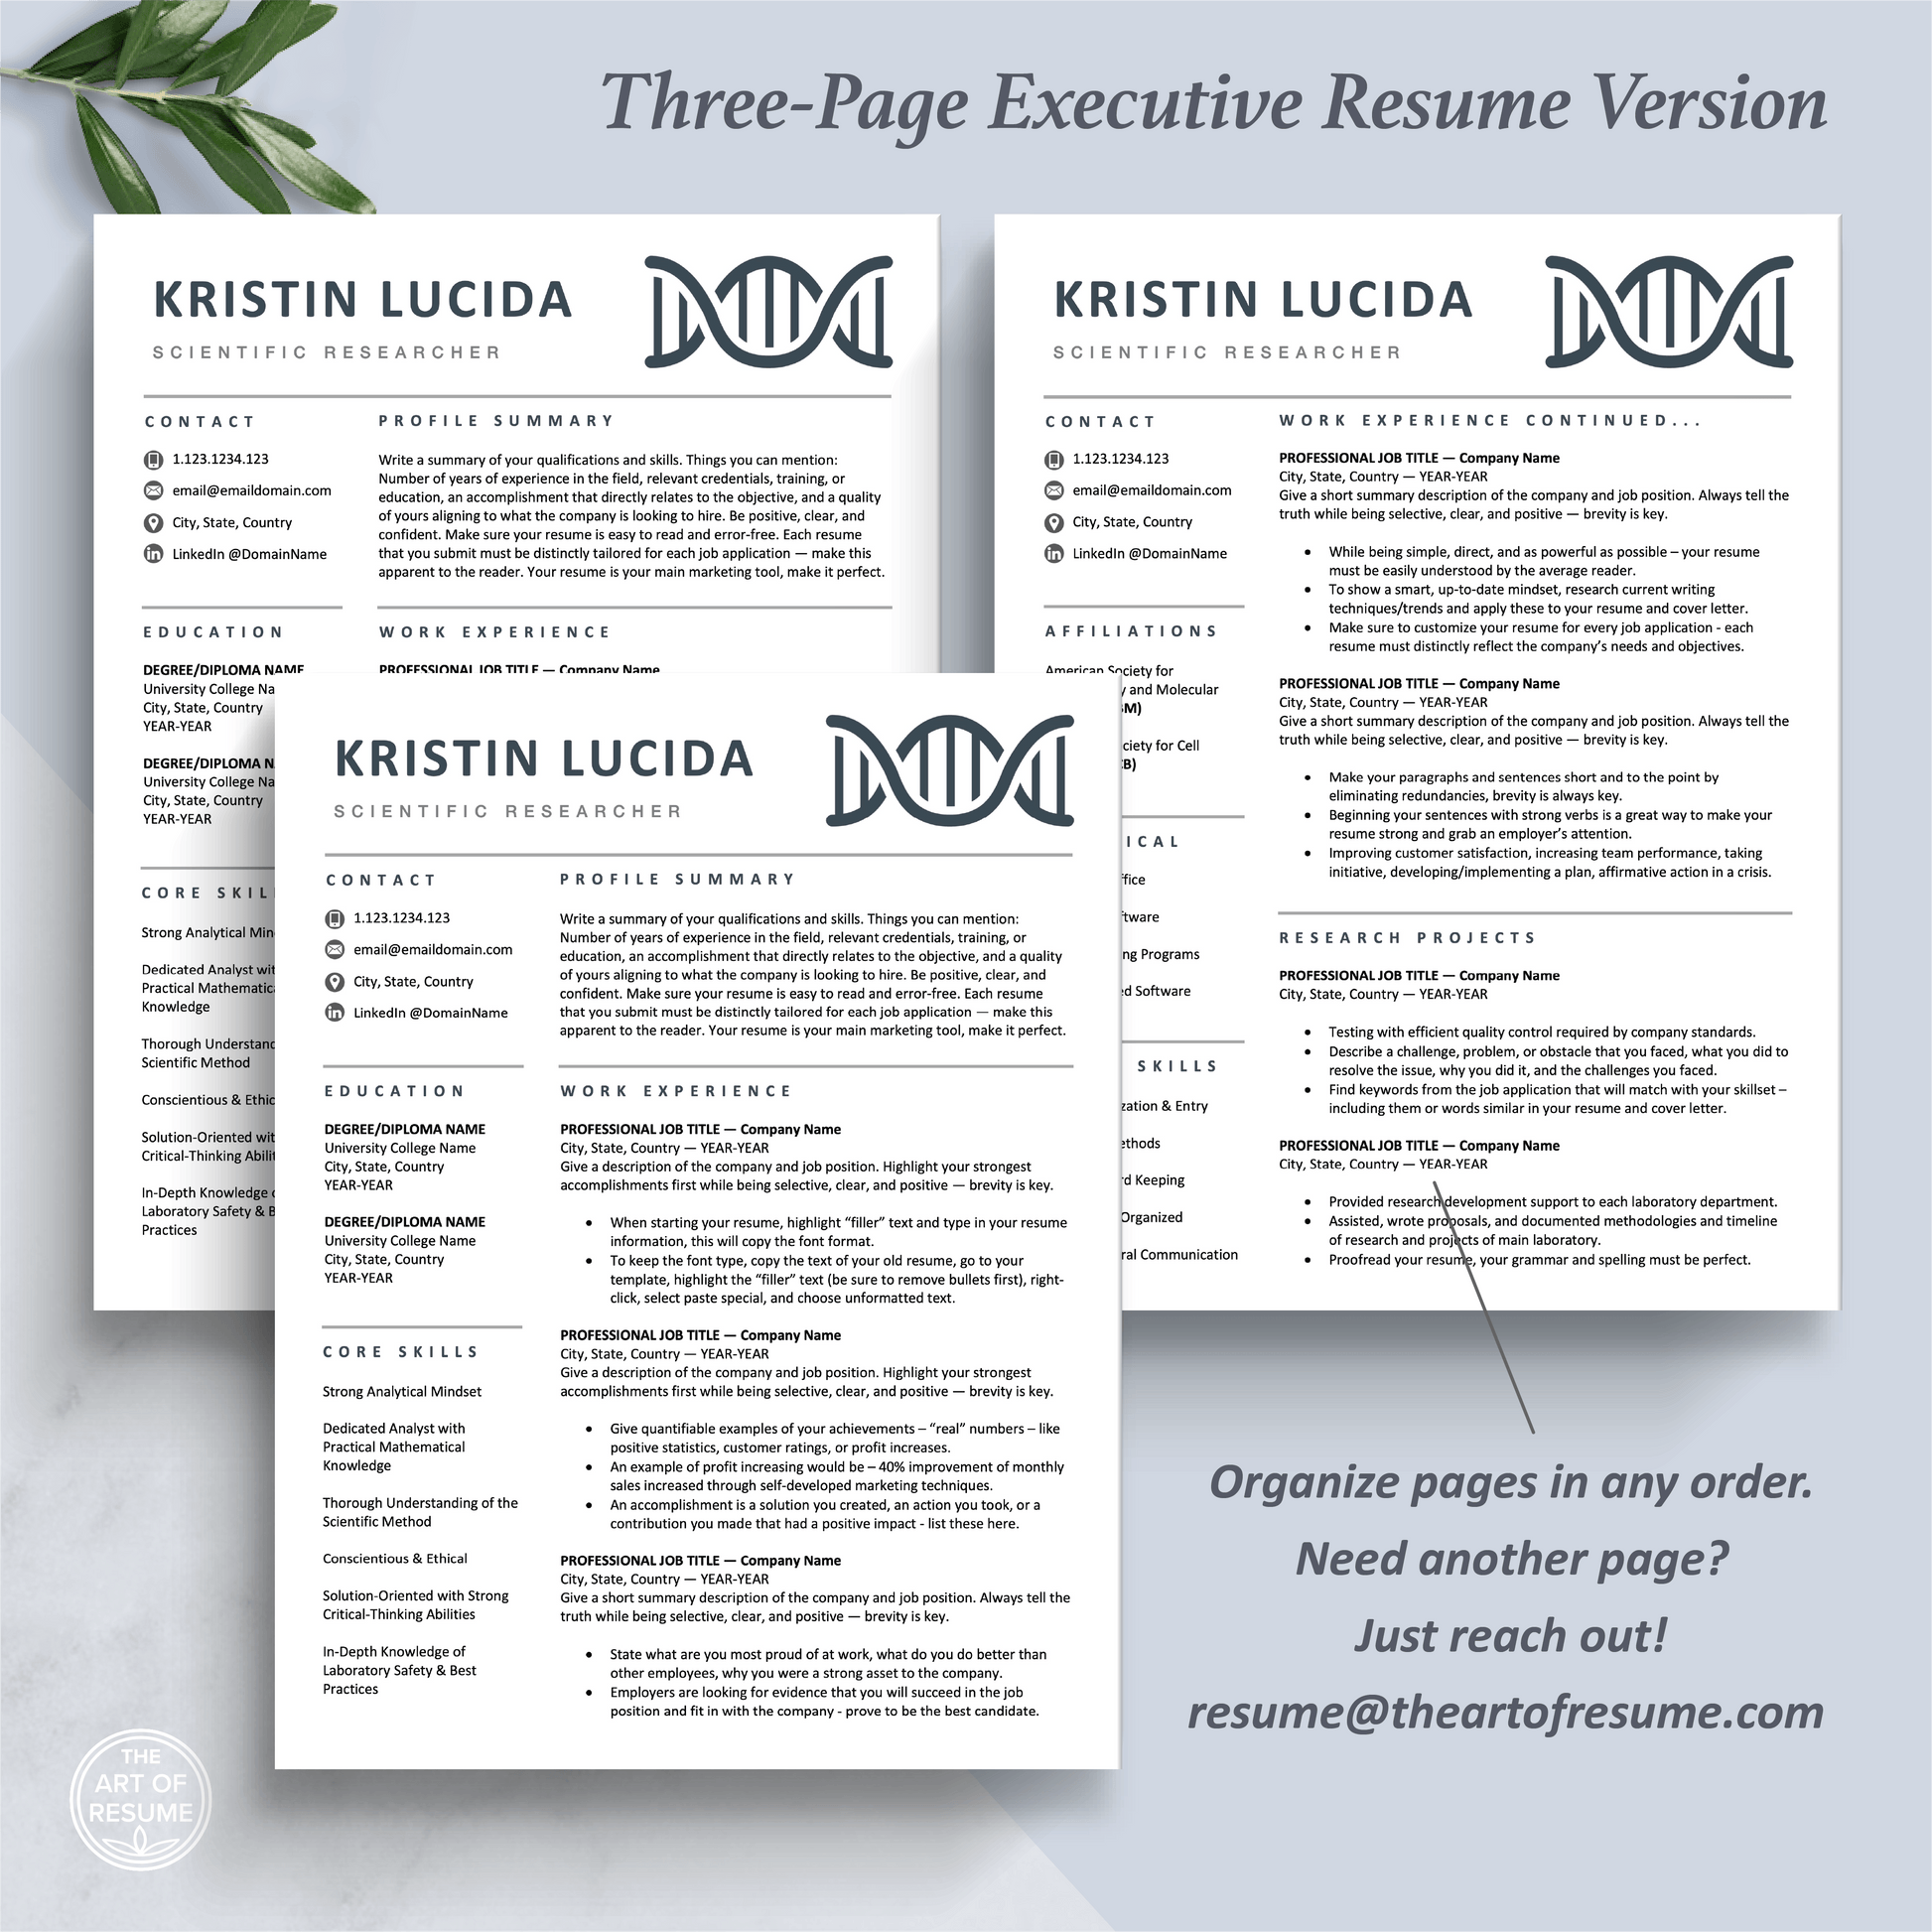 The Art of Resume Templates | Three-Page Scientist, Biochemist, Lab Researcher, Student, Teacher DNA Helix  Executive CEO C-Suite Level  Resume CV Template Format | Curriculum Vitae